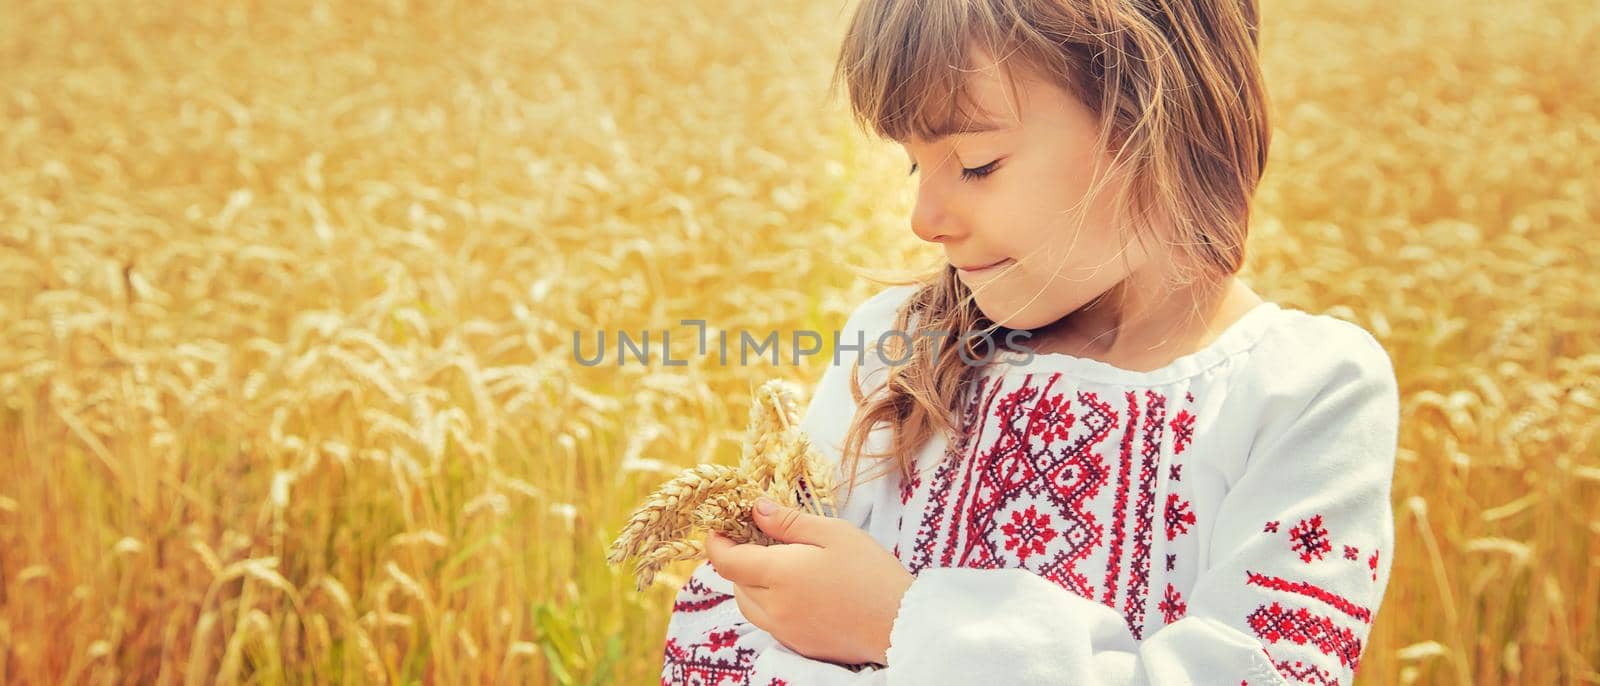 A child in a field of wheat in an embroidered shirt. Ukrainian. Selective focus.